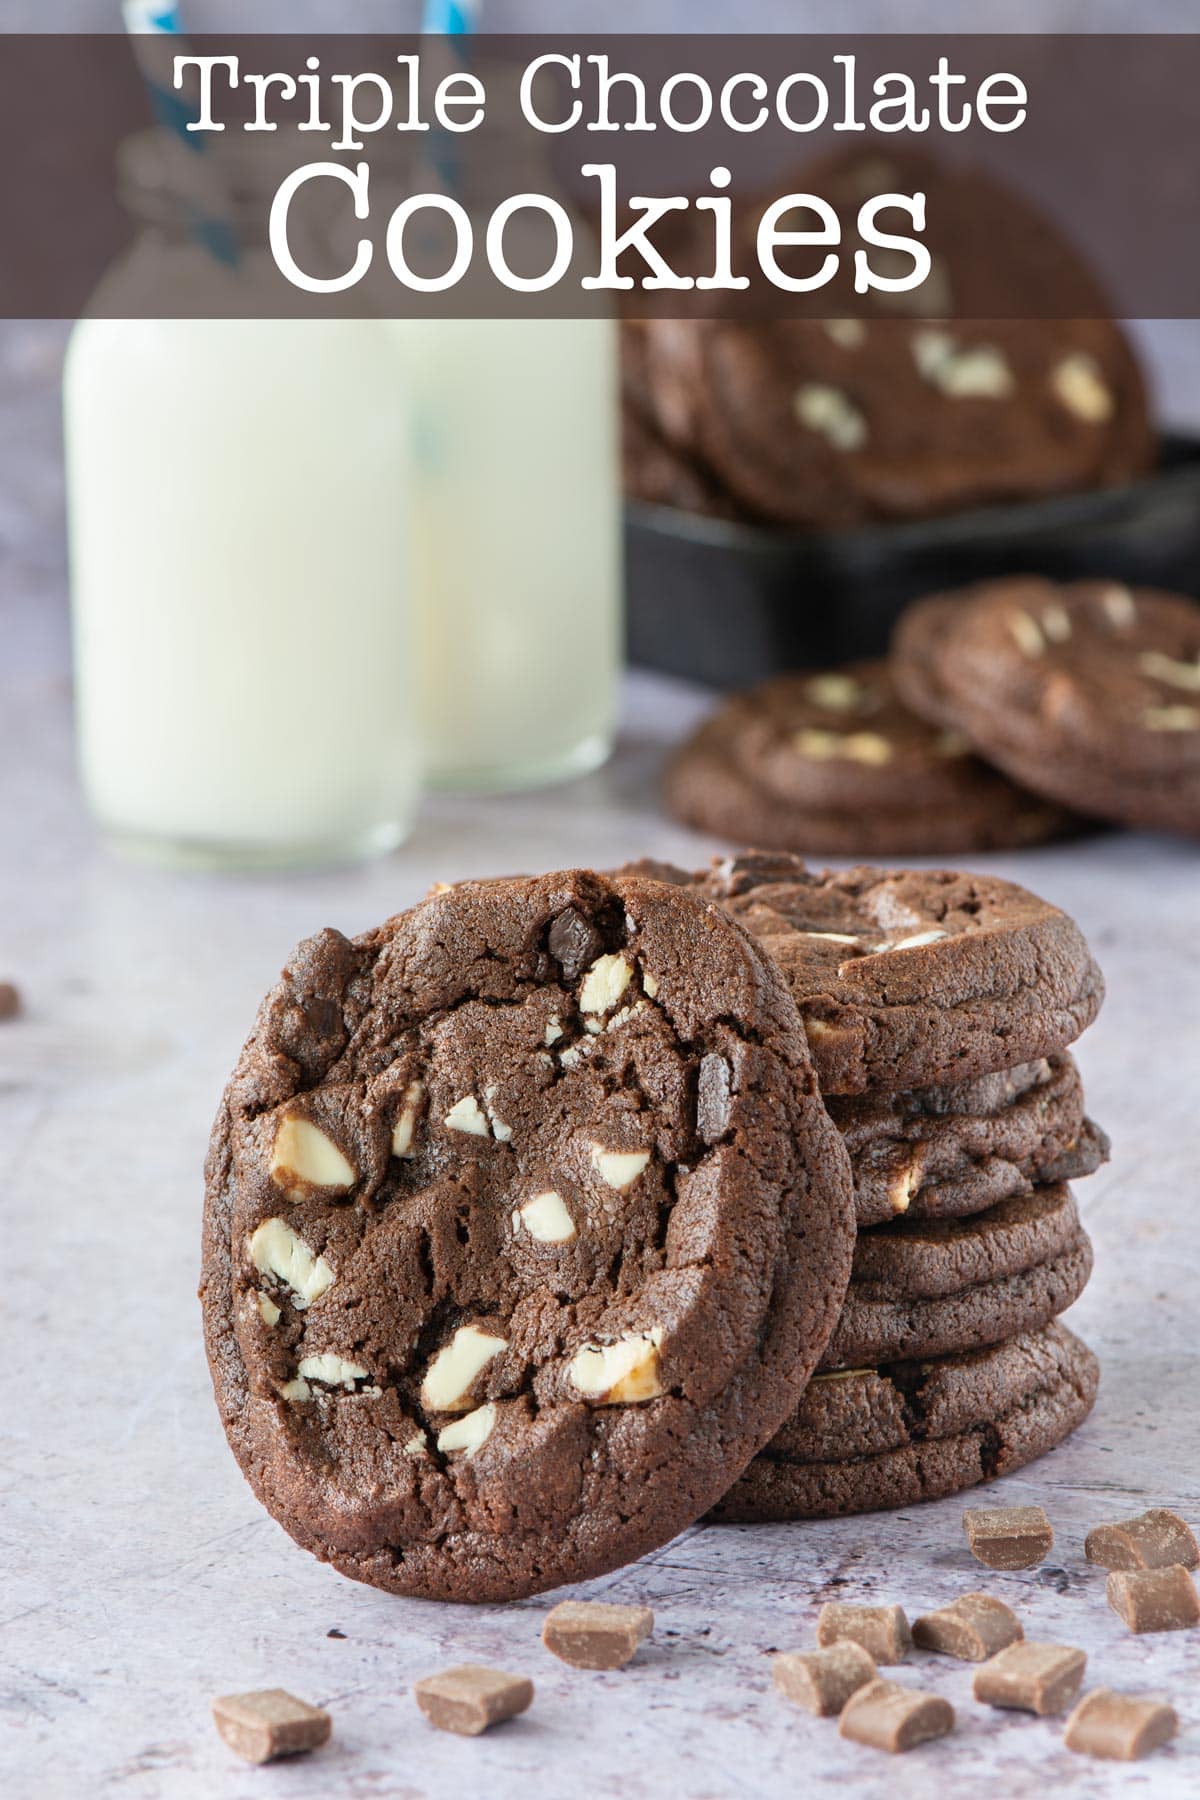 Triple Chocolate Cookies - The ultimate chocolate fix in biscuit form. Milk chocolate cookies with plenty of milk and dark chocolate chunks - Delicious!